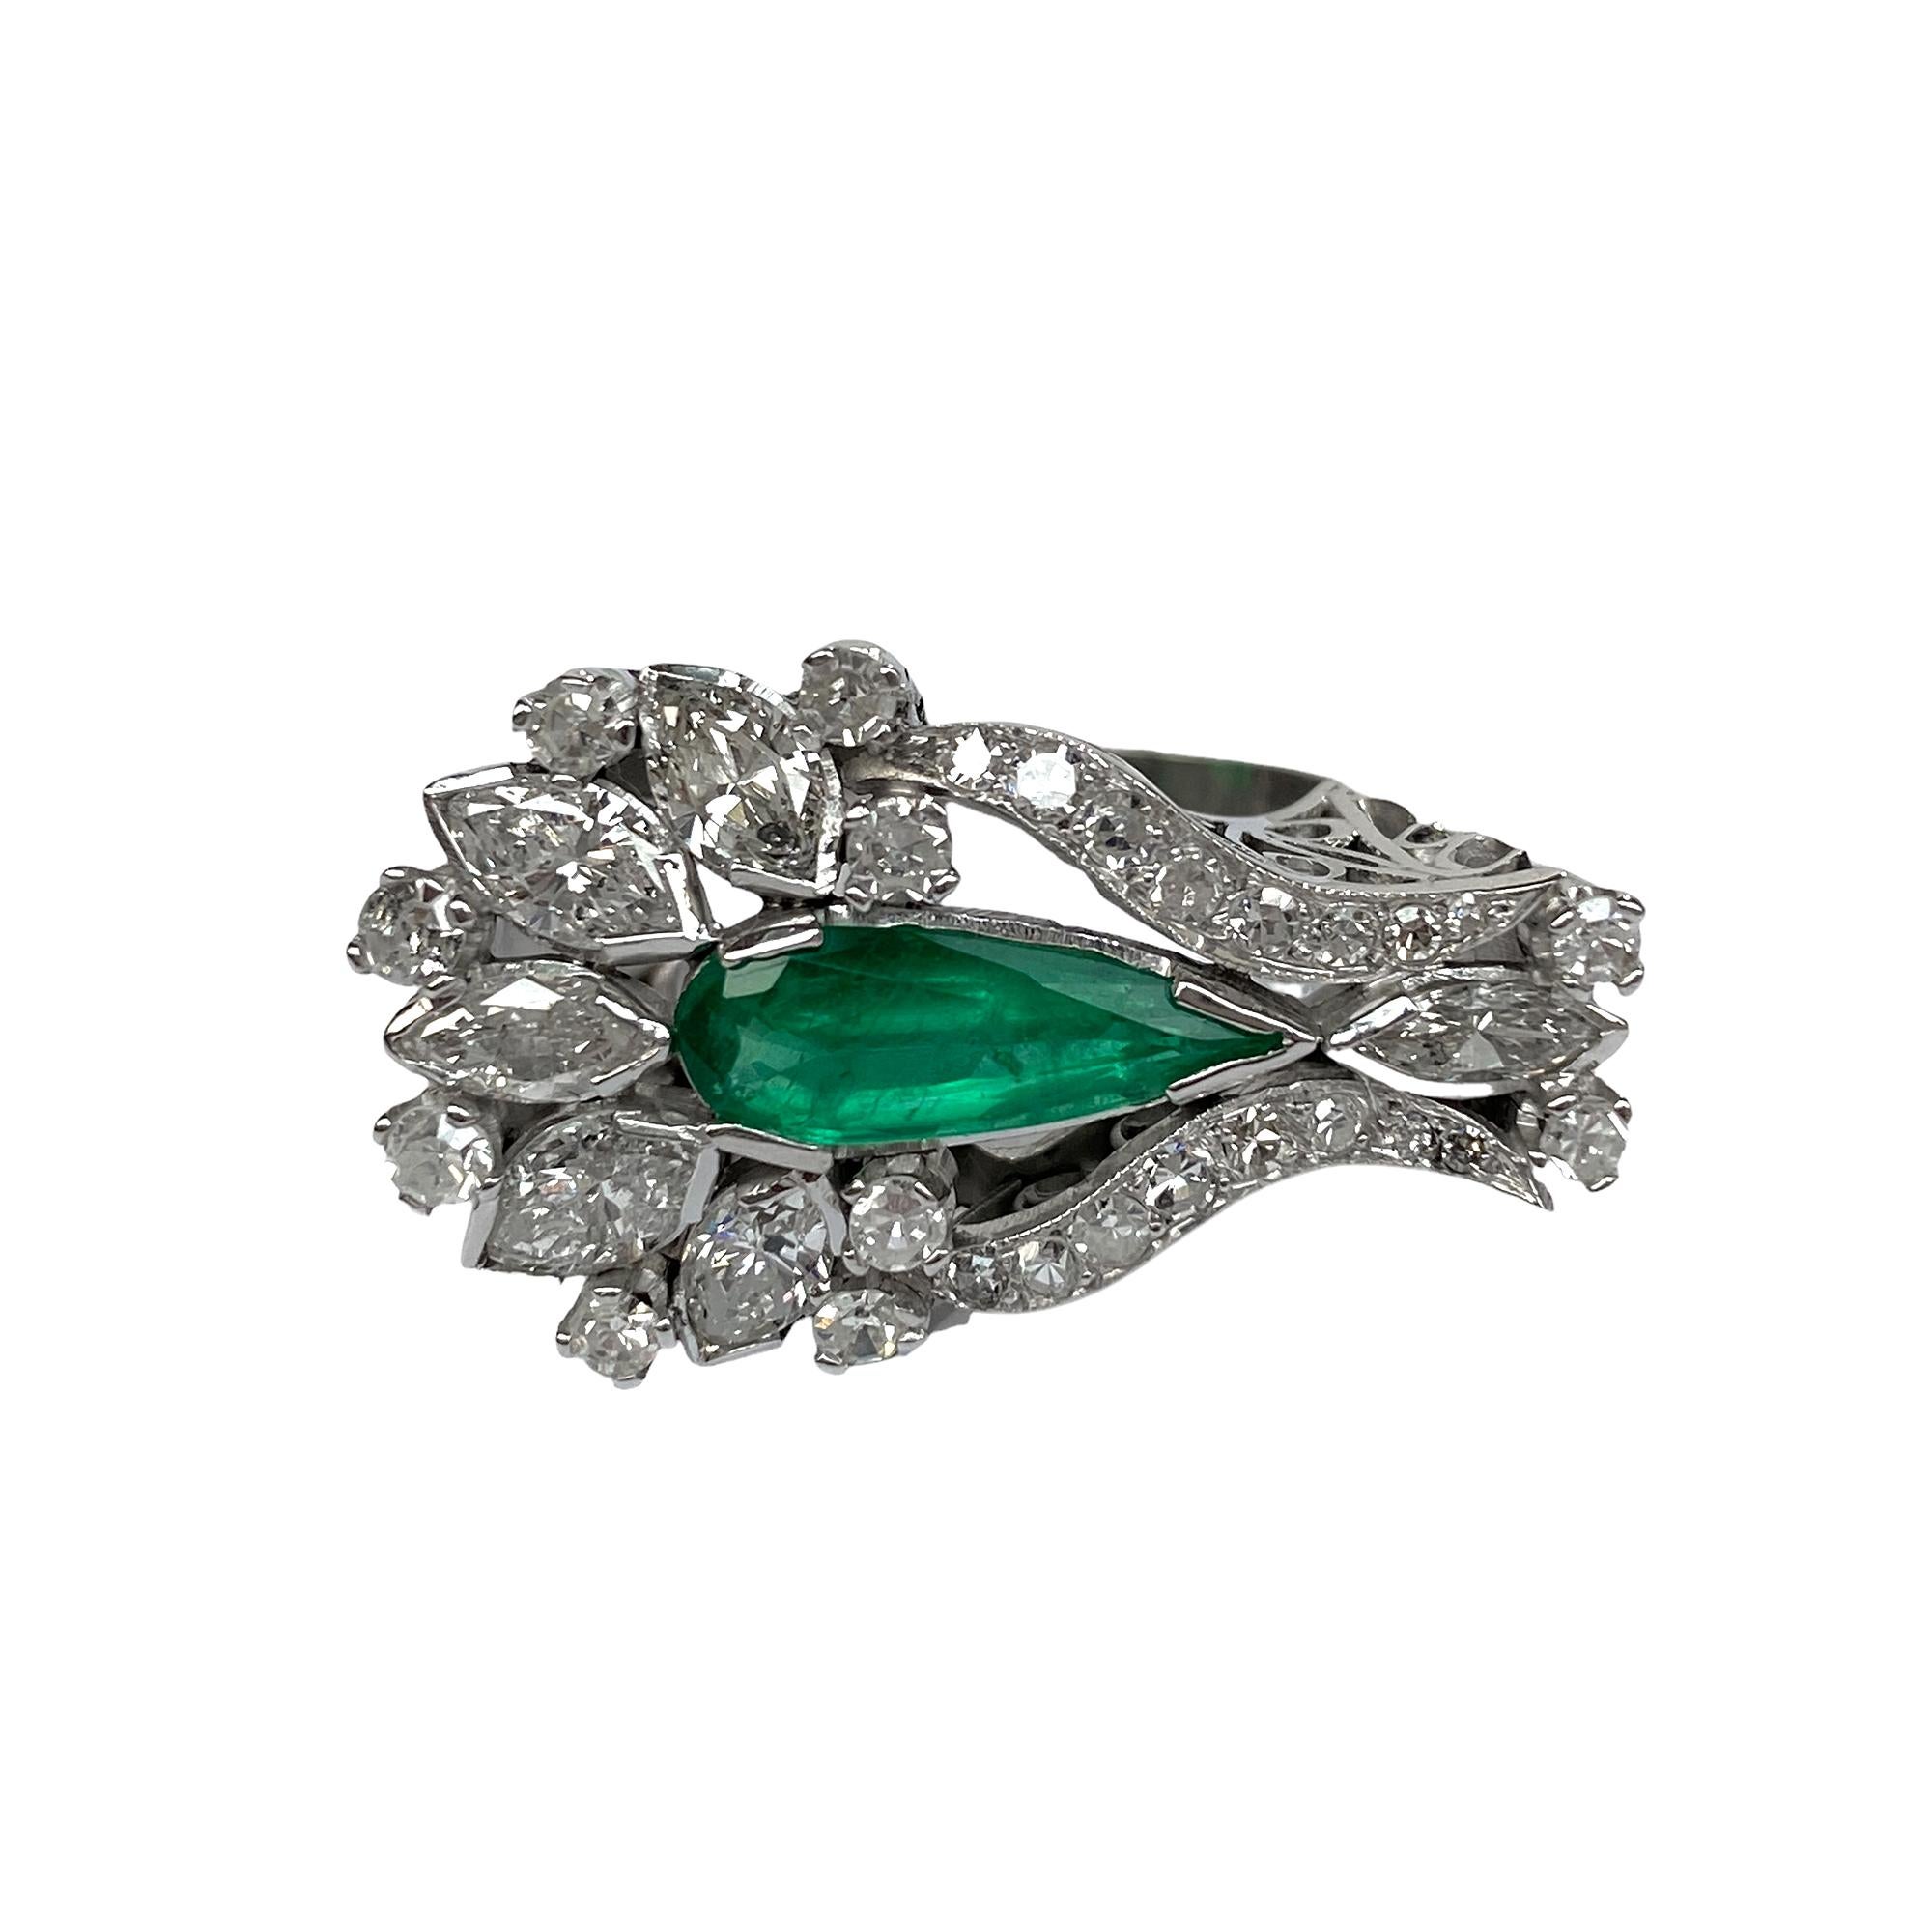 Perfect condition - quality grade of setting and polishing is good
Total weight:  9,22 grams
Diamonds round brilliant and marquise cut : 2,17 carats of white natural diamonds
Emerald : 1,90 carats - Origin Zambia
Ring Size : US 8 (if you need